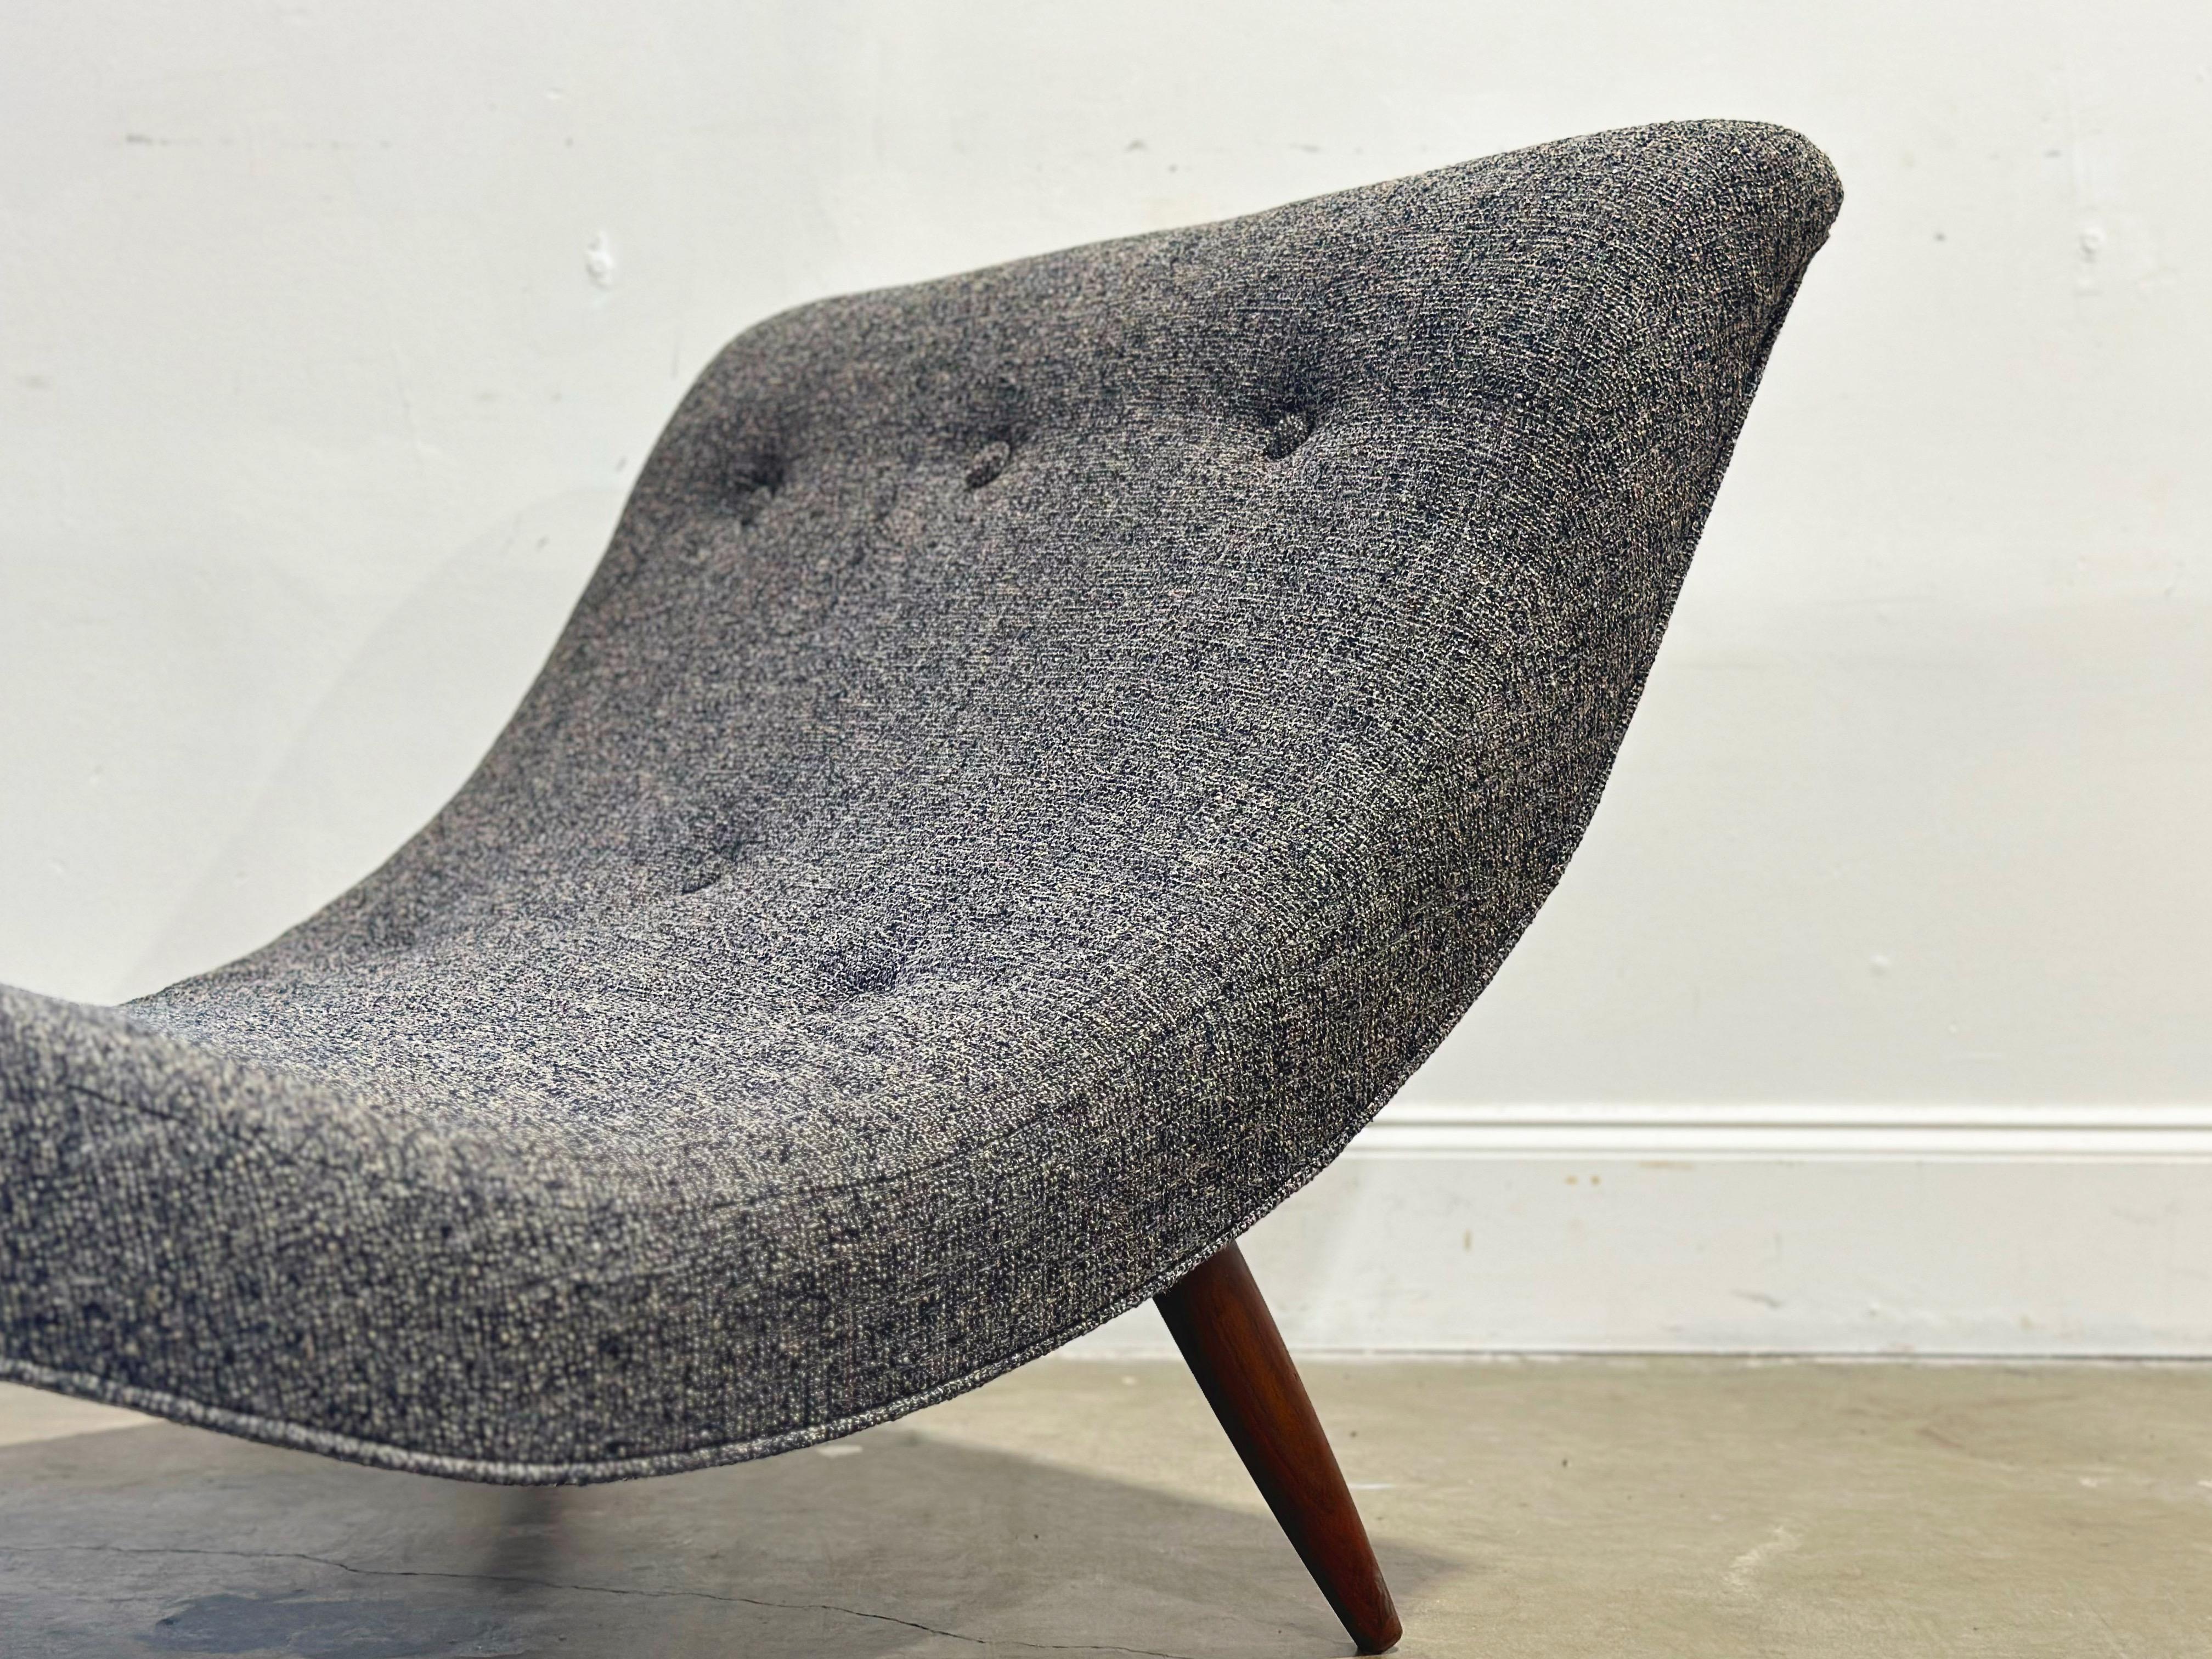 Midcentury Modern Adrian Pearsall Wave Chaise Lounge - Modernist Lounge Chair 2